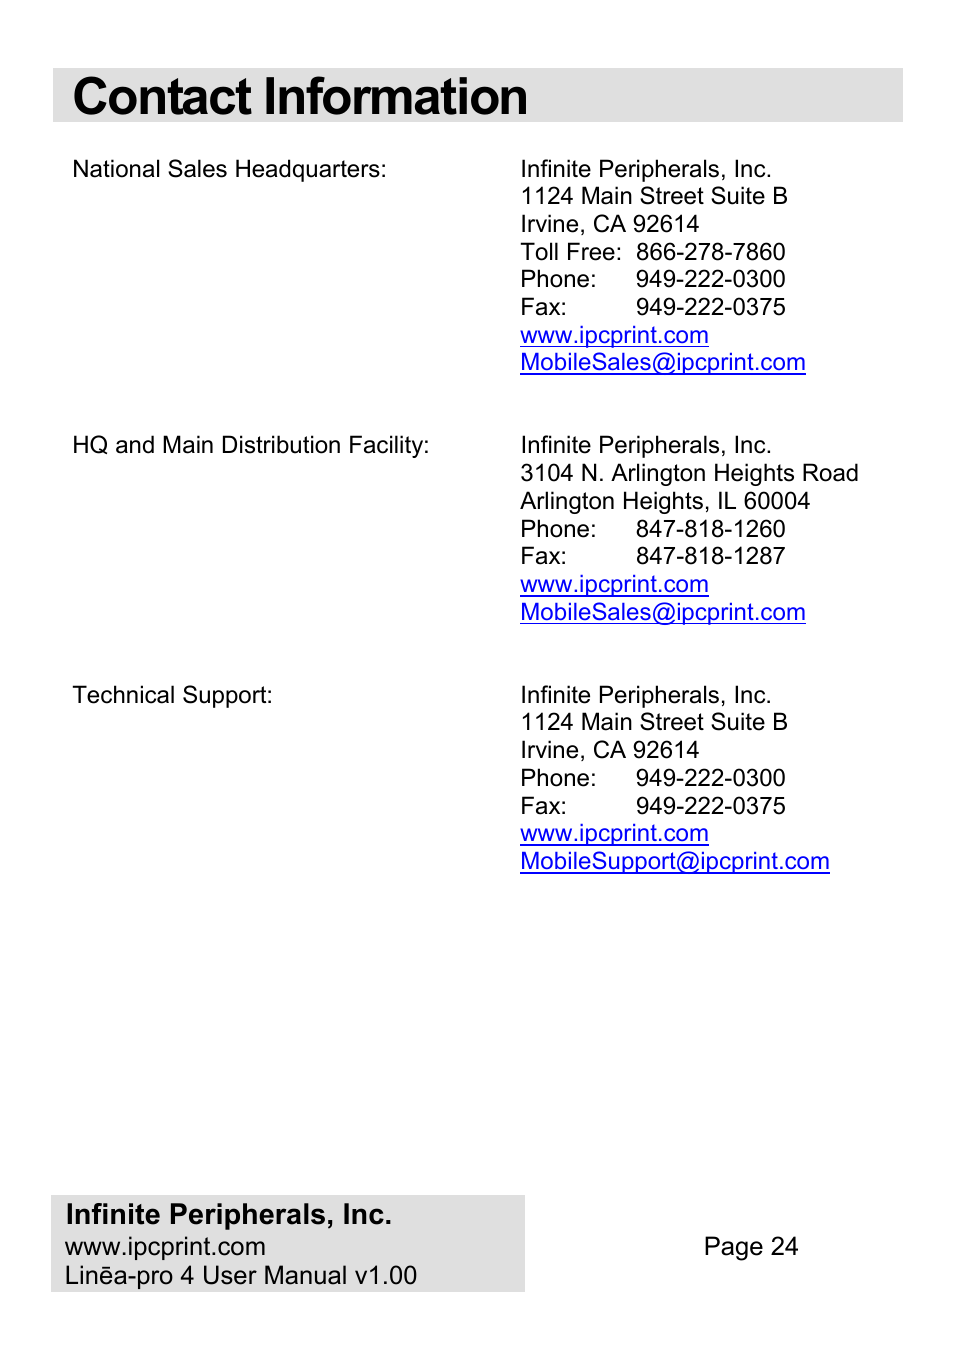 Contact information, Infinite peripherals, inc | Infinite Peripherals PRO 4 User Manual | Page 24 / 24